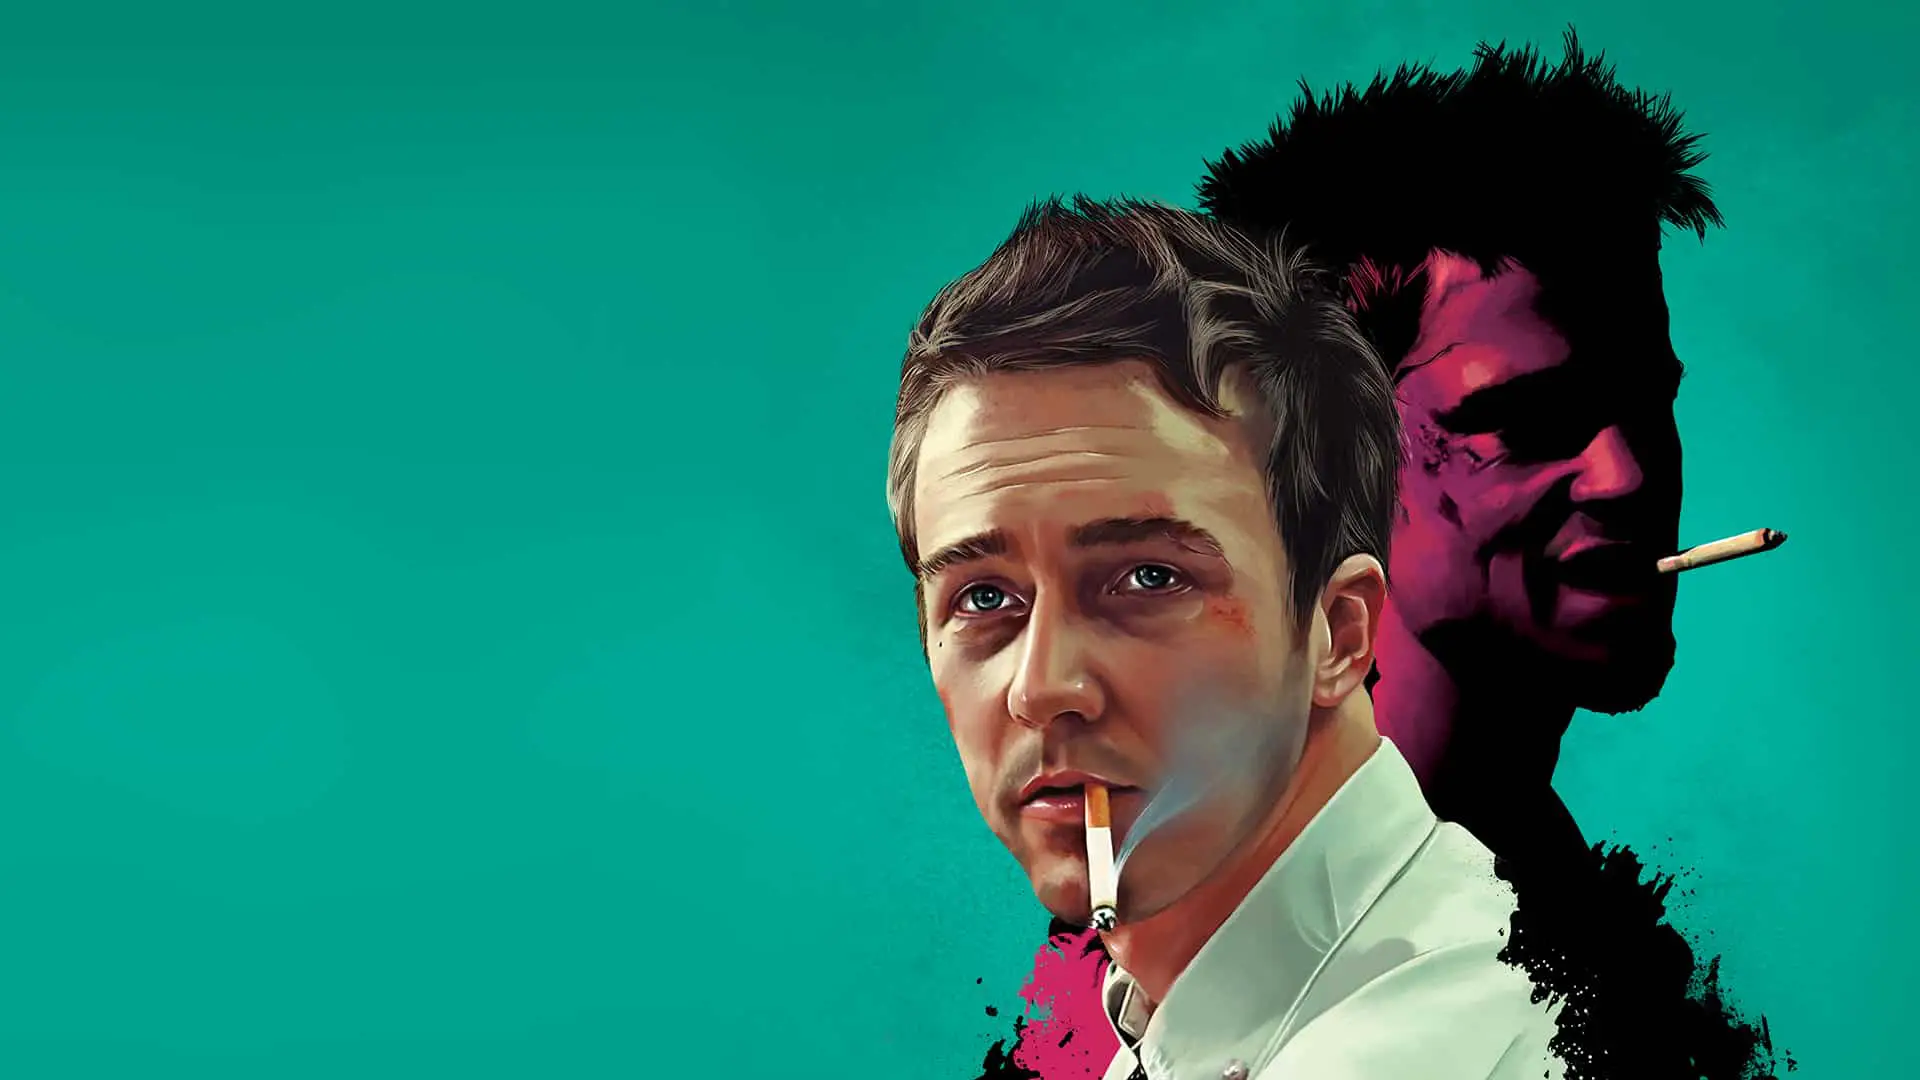 What is the movie "Fight Club" about?